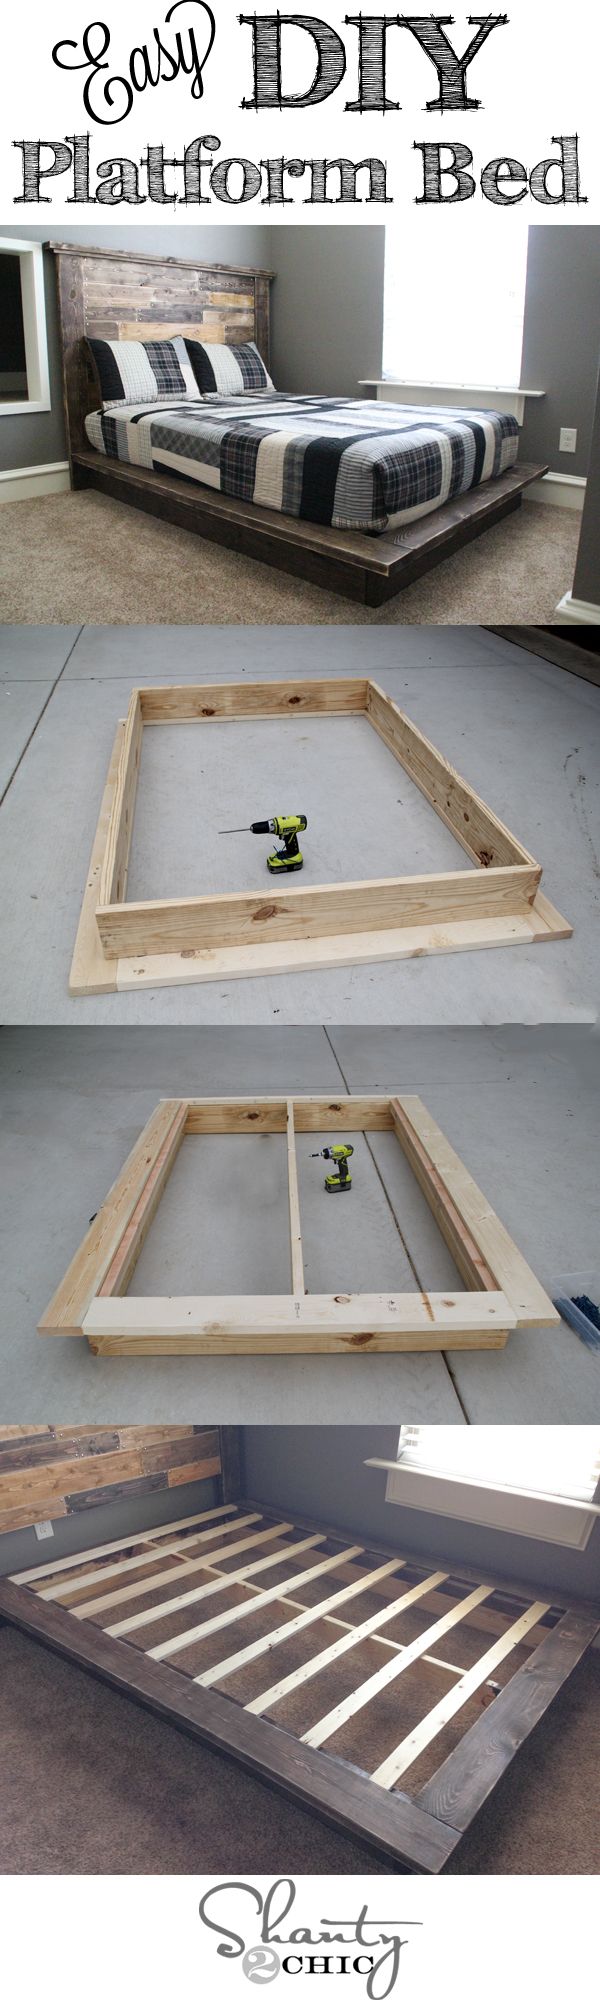 Easy DIY Platform Bed that anyone can build!